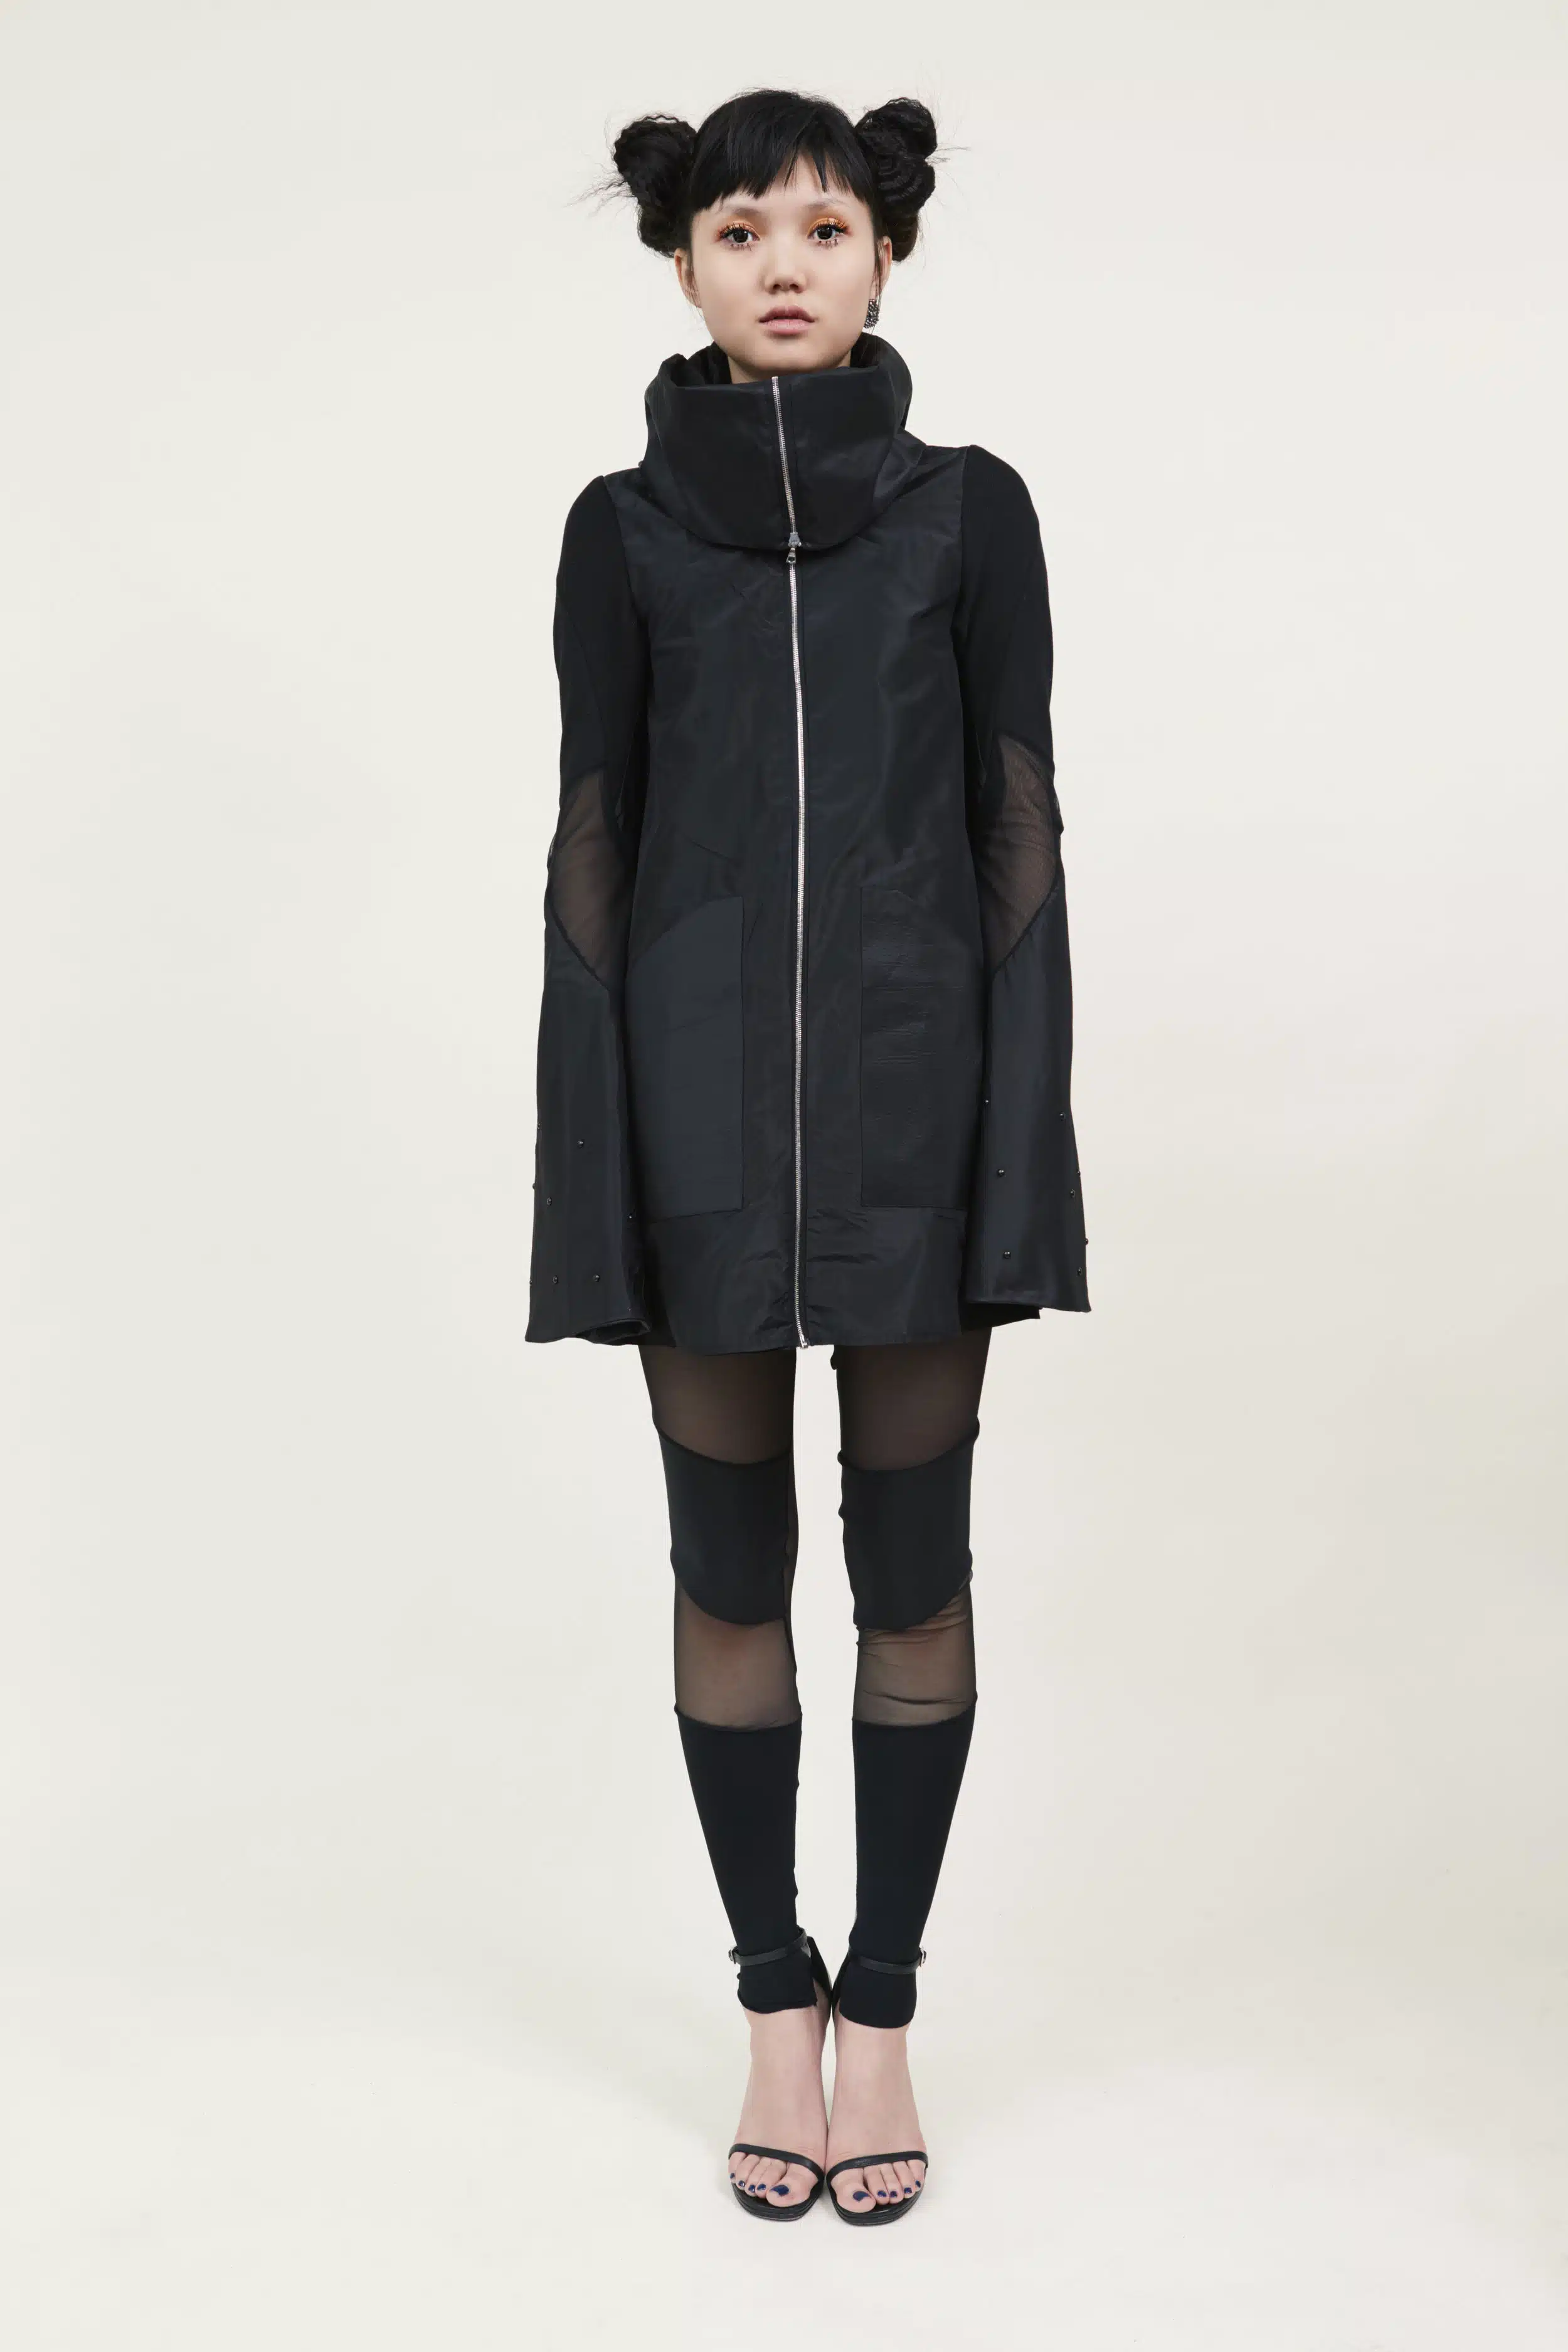 Image from FW17 Collection